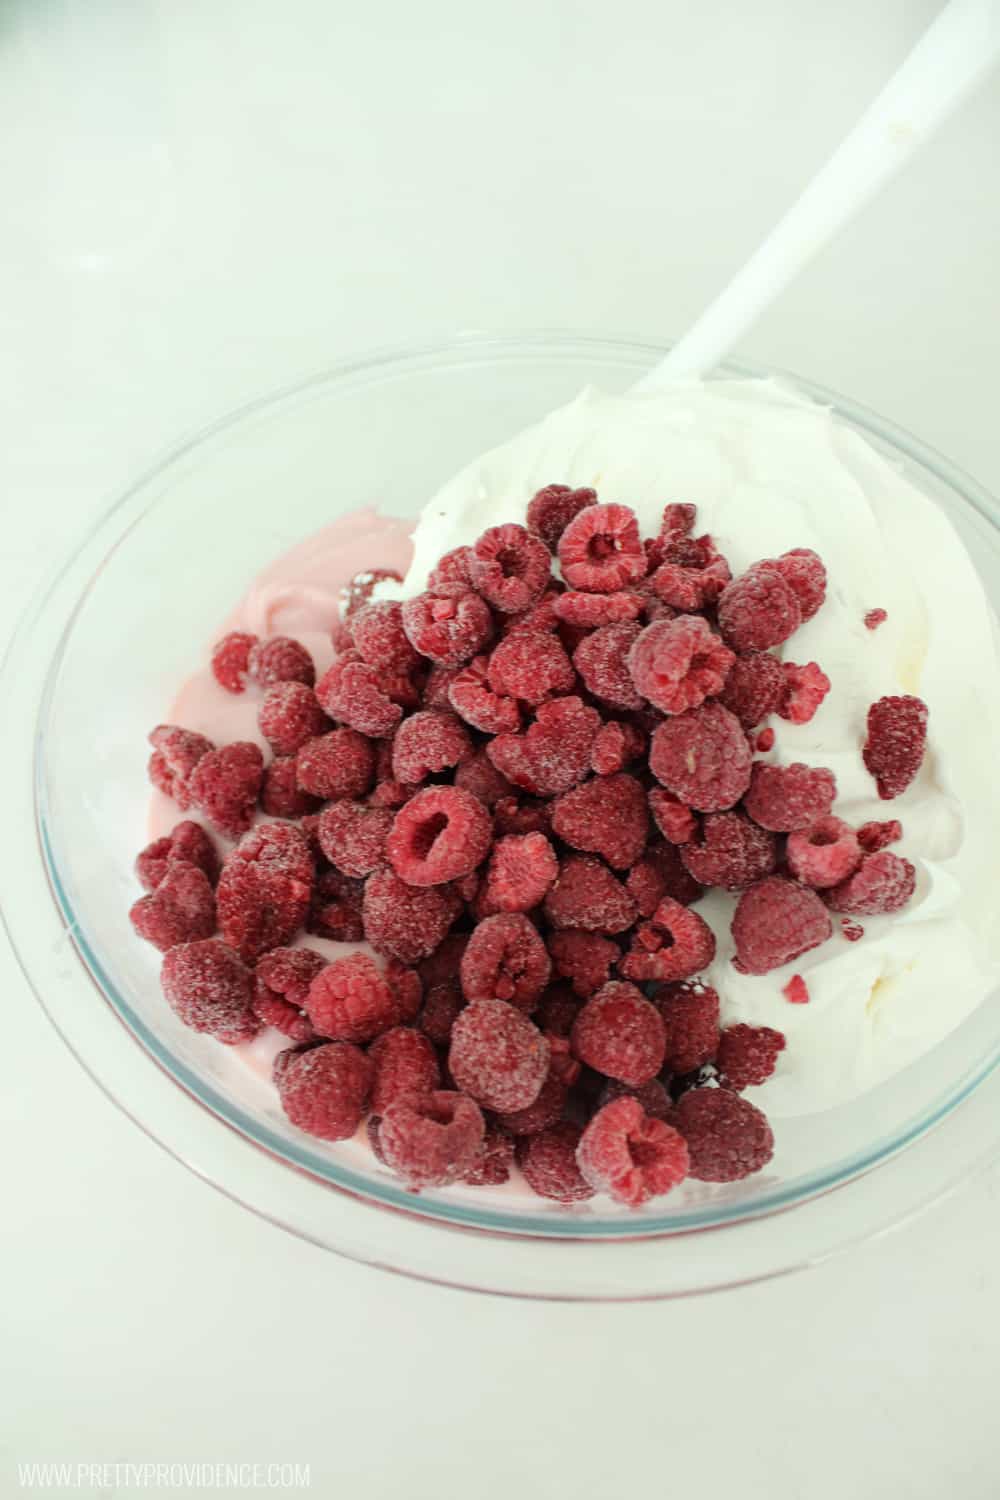 Delicious raspberry fluff! Perfect side for brunch or any BBQ! Everyone always raves about it and it is SO easy to whip up! 